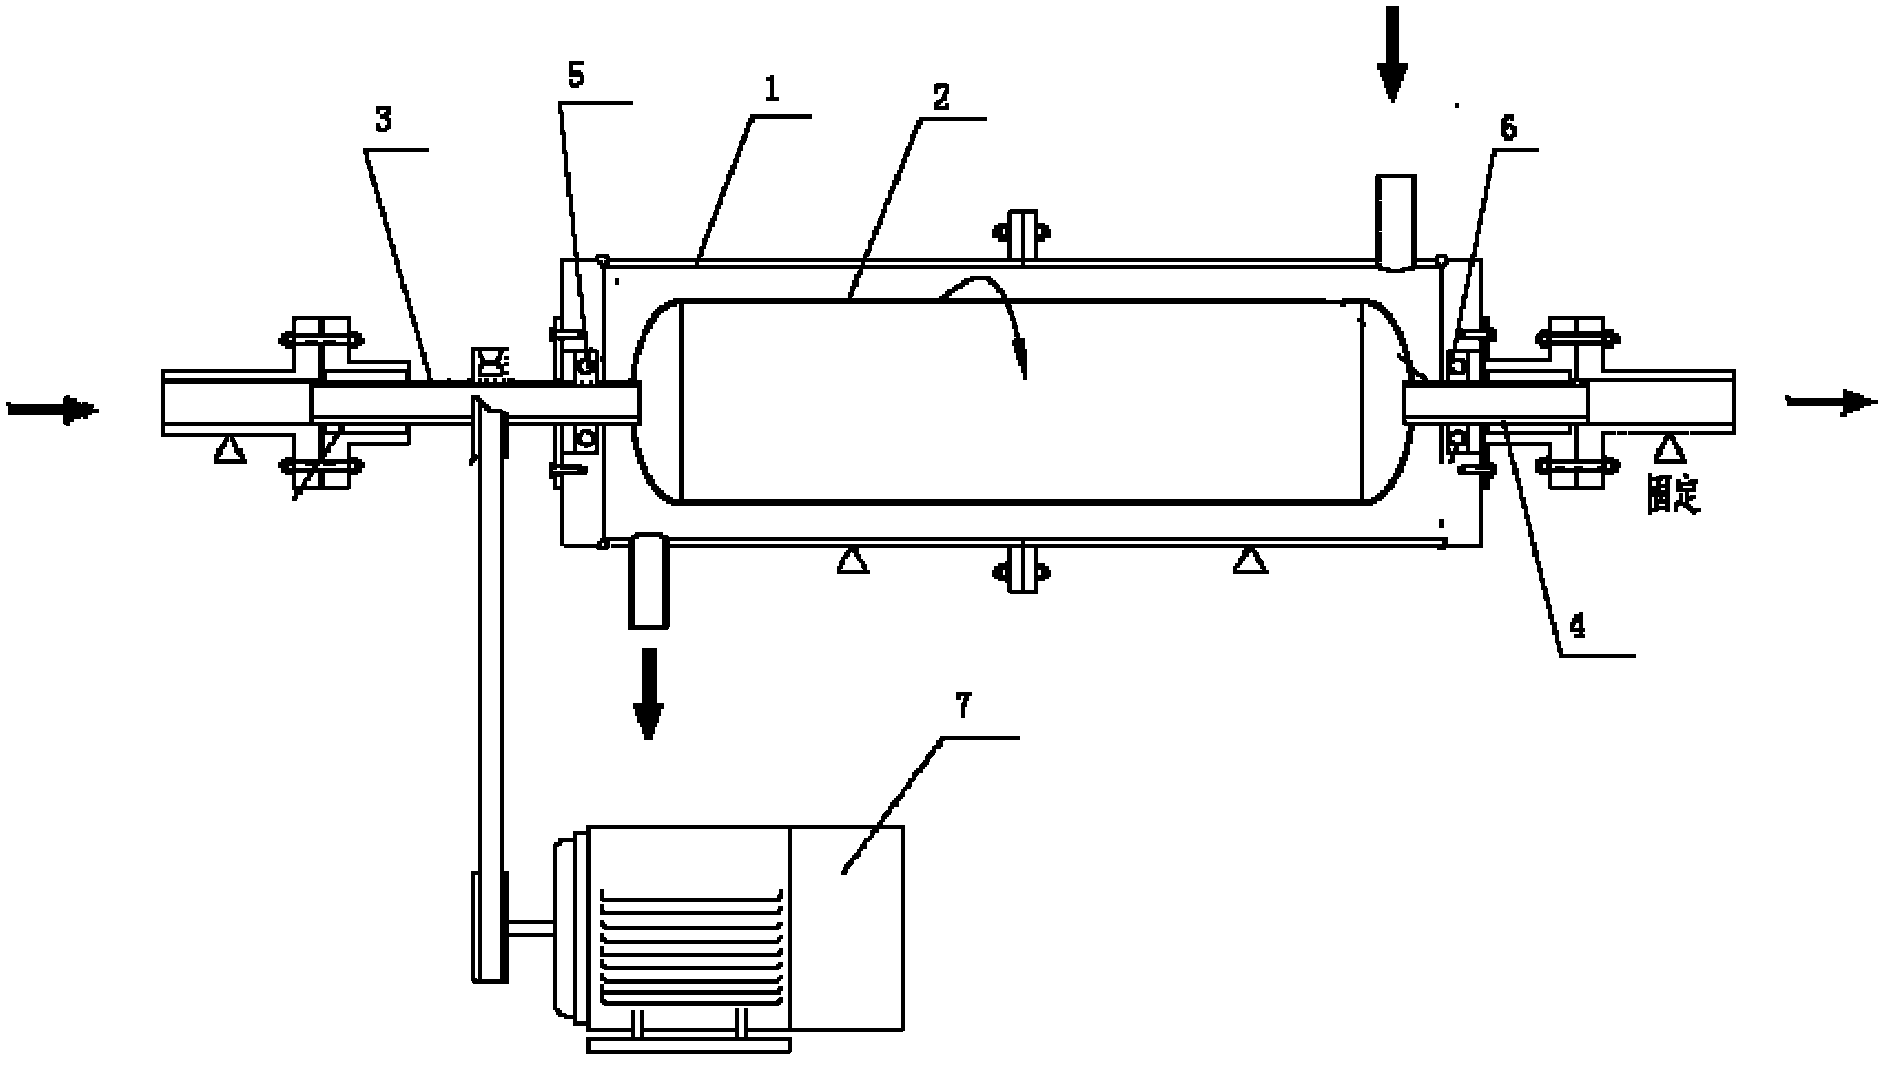 Heat exchanger with heat exchange surface capable of rotating so as to strengthen heat exchange